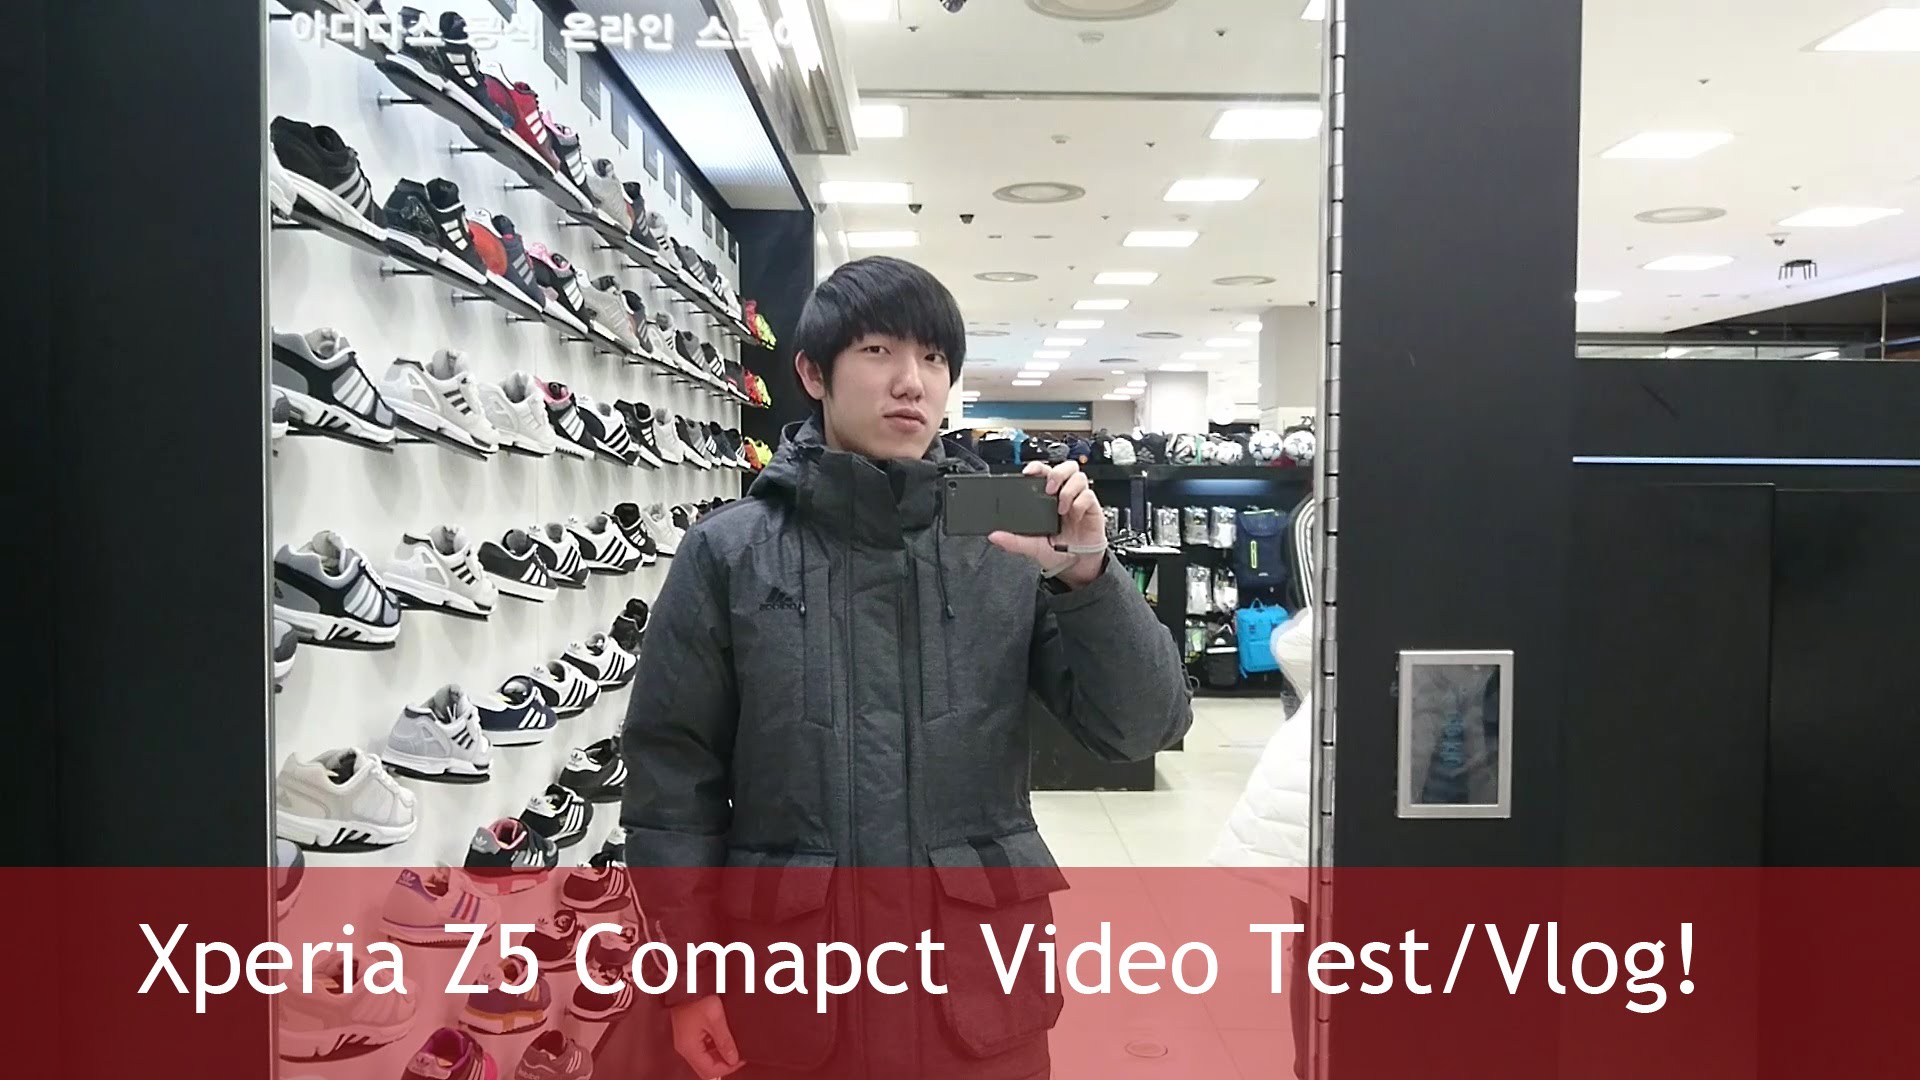 A Day at the Mart (Xperia Z5 Compact Video Test/Vlog)